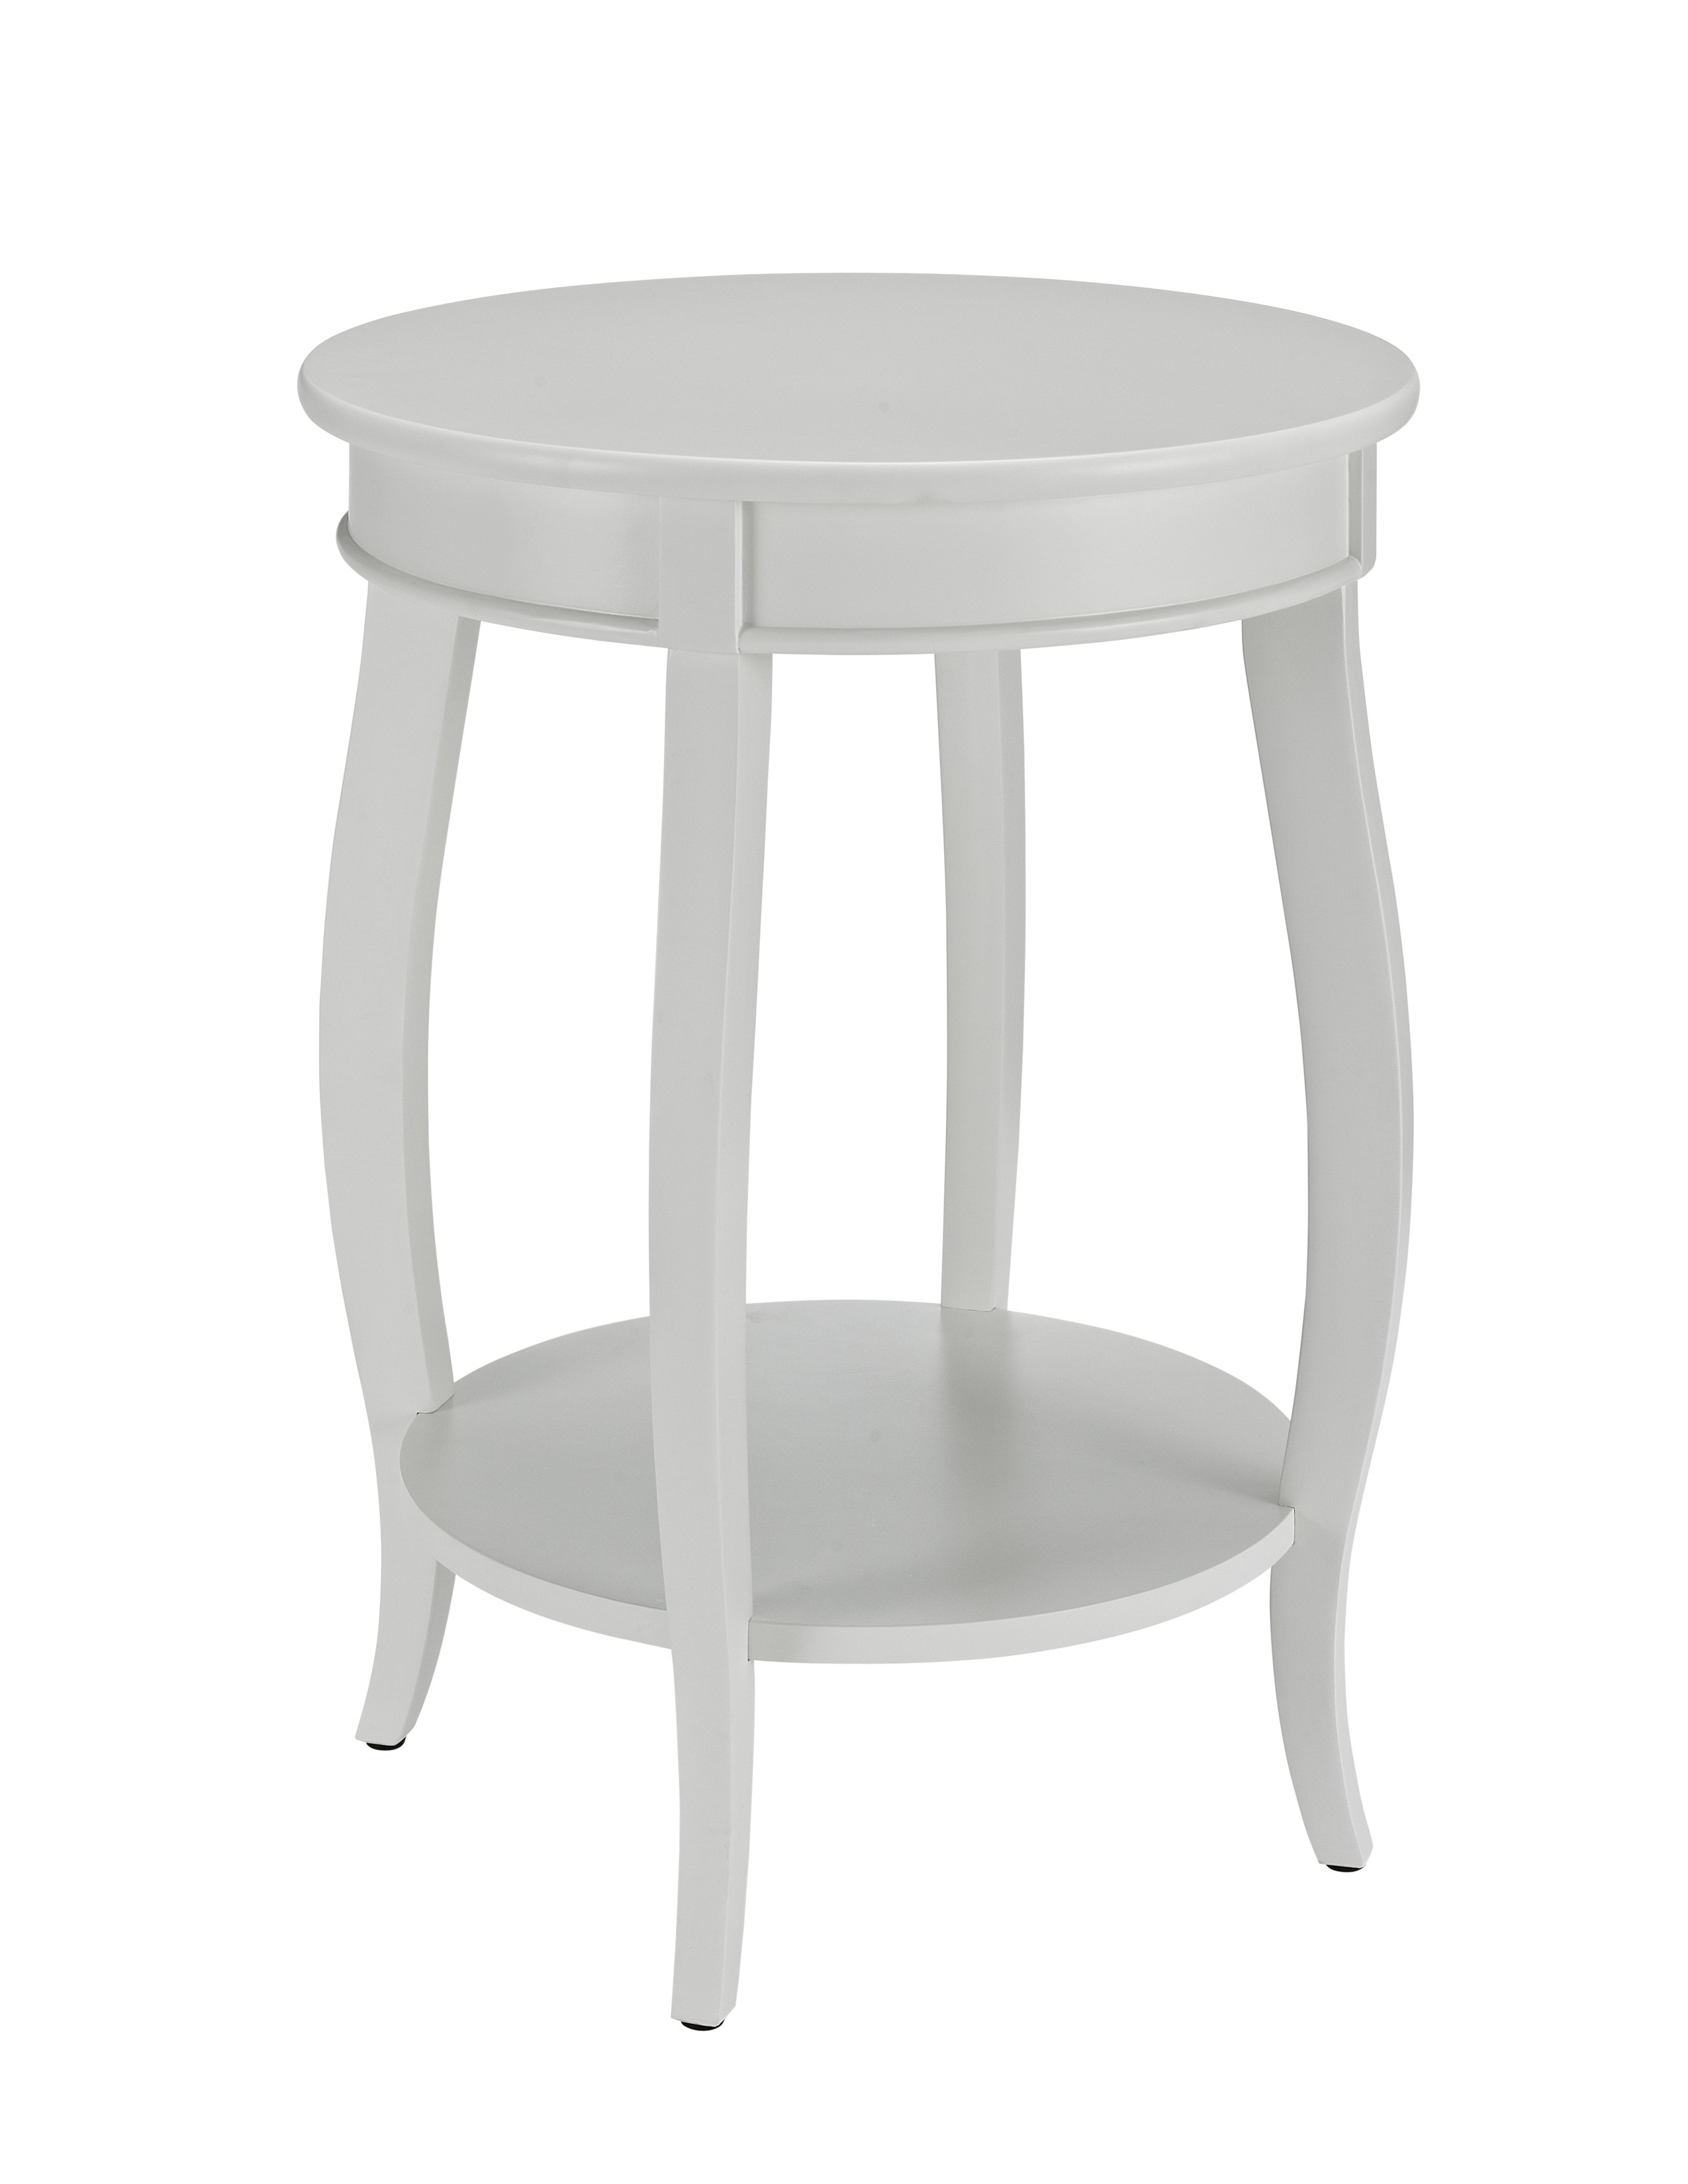 white round pedestal side table decor ideasdecor ideas accent oval coffee barn kitchen nautical themed lamps new theater room furniture great chic mirror cube small patio end